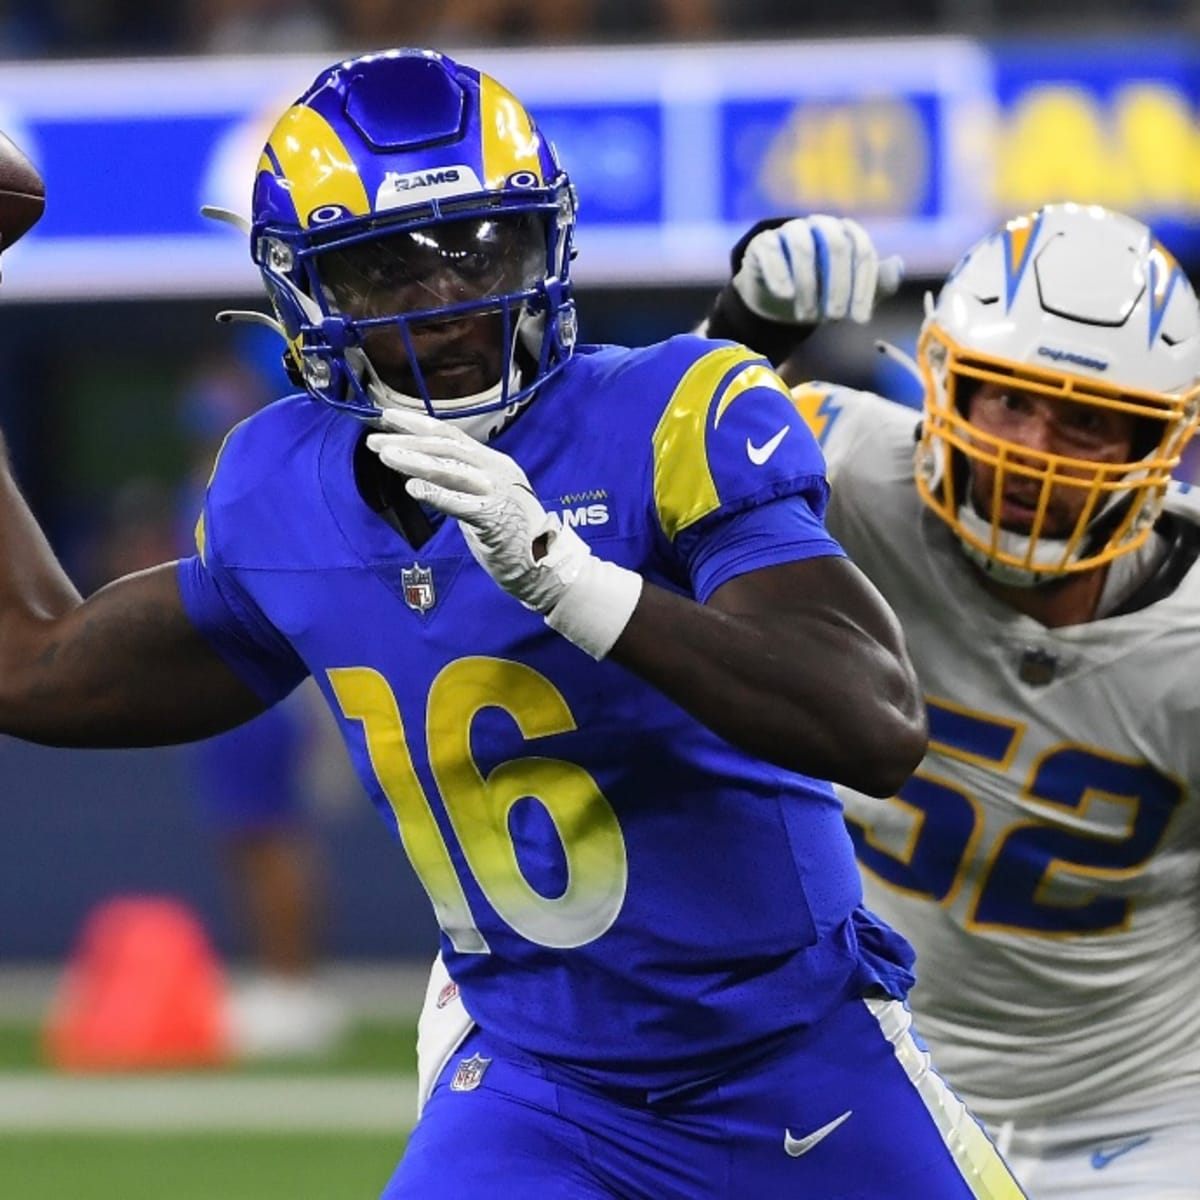 Chargers defeat Rams, 13-6, in first NFL game at SoFi stadium with fans